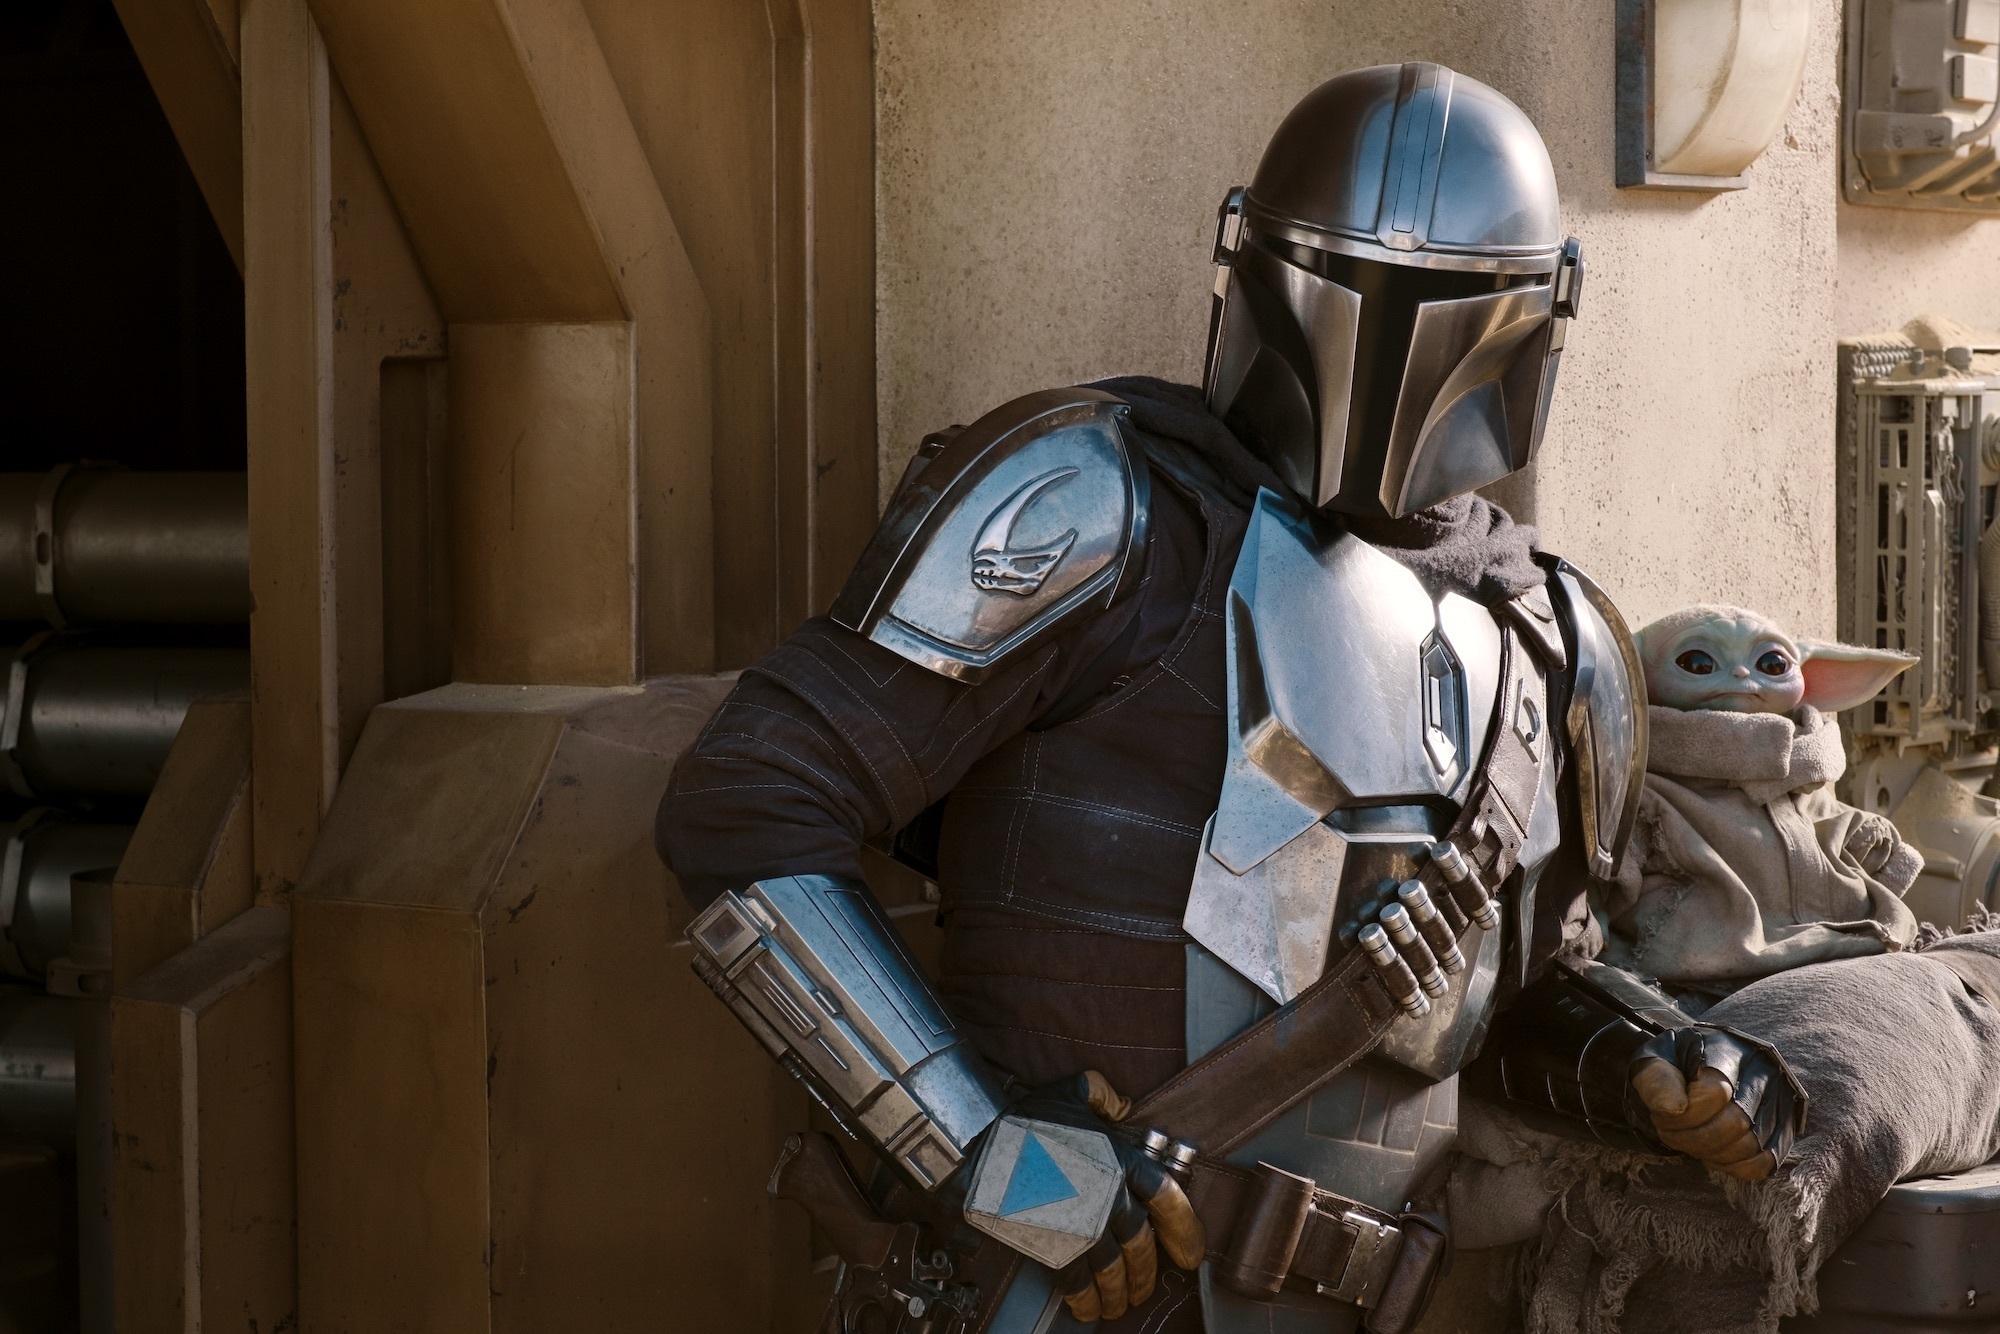 One character from the 'Star Wars' live-action series, titled 'The Mandalorian'